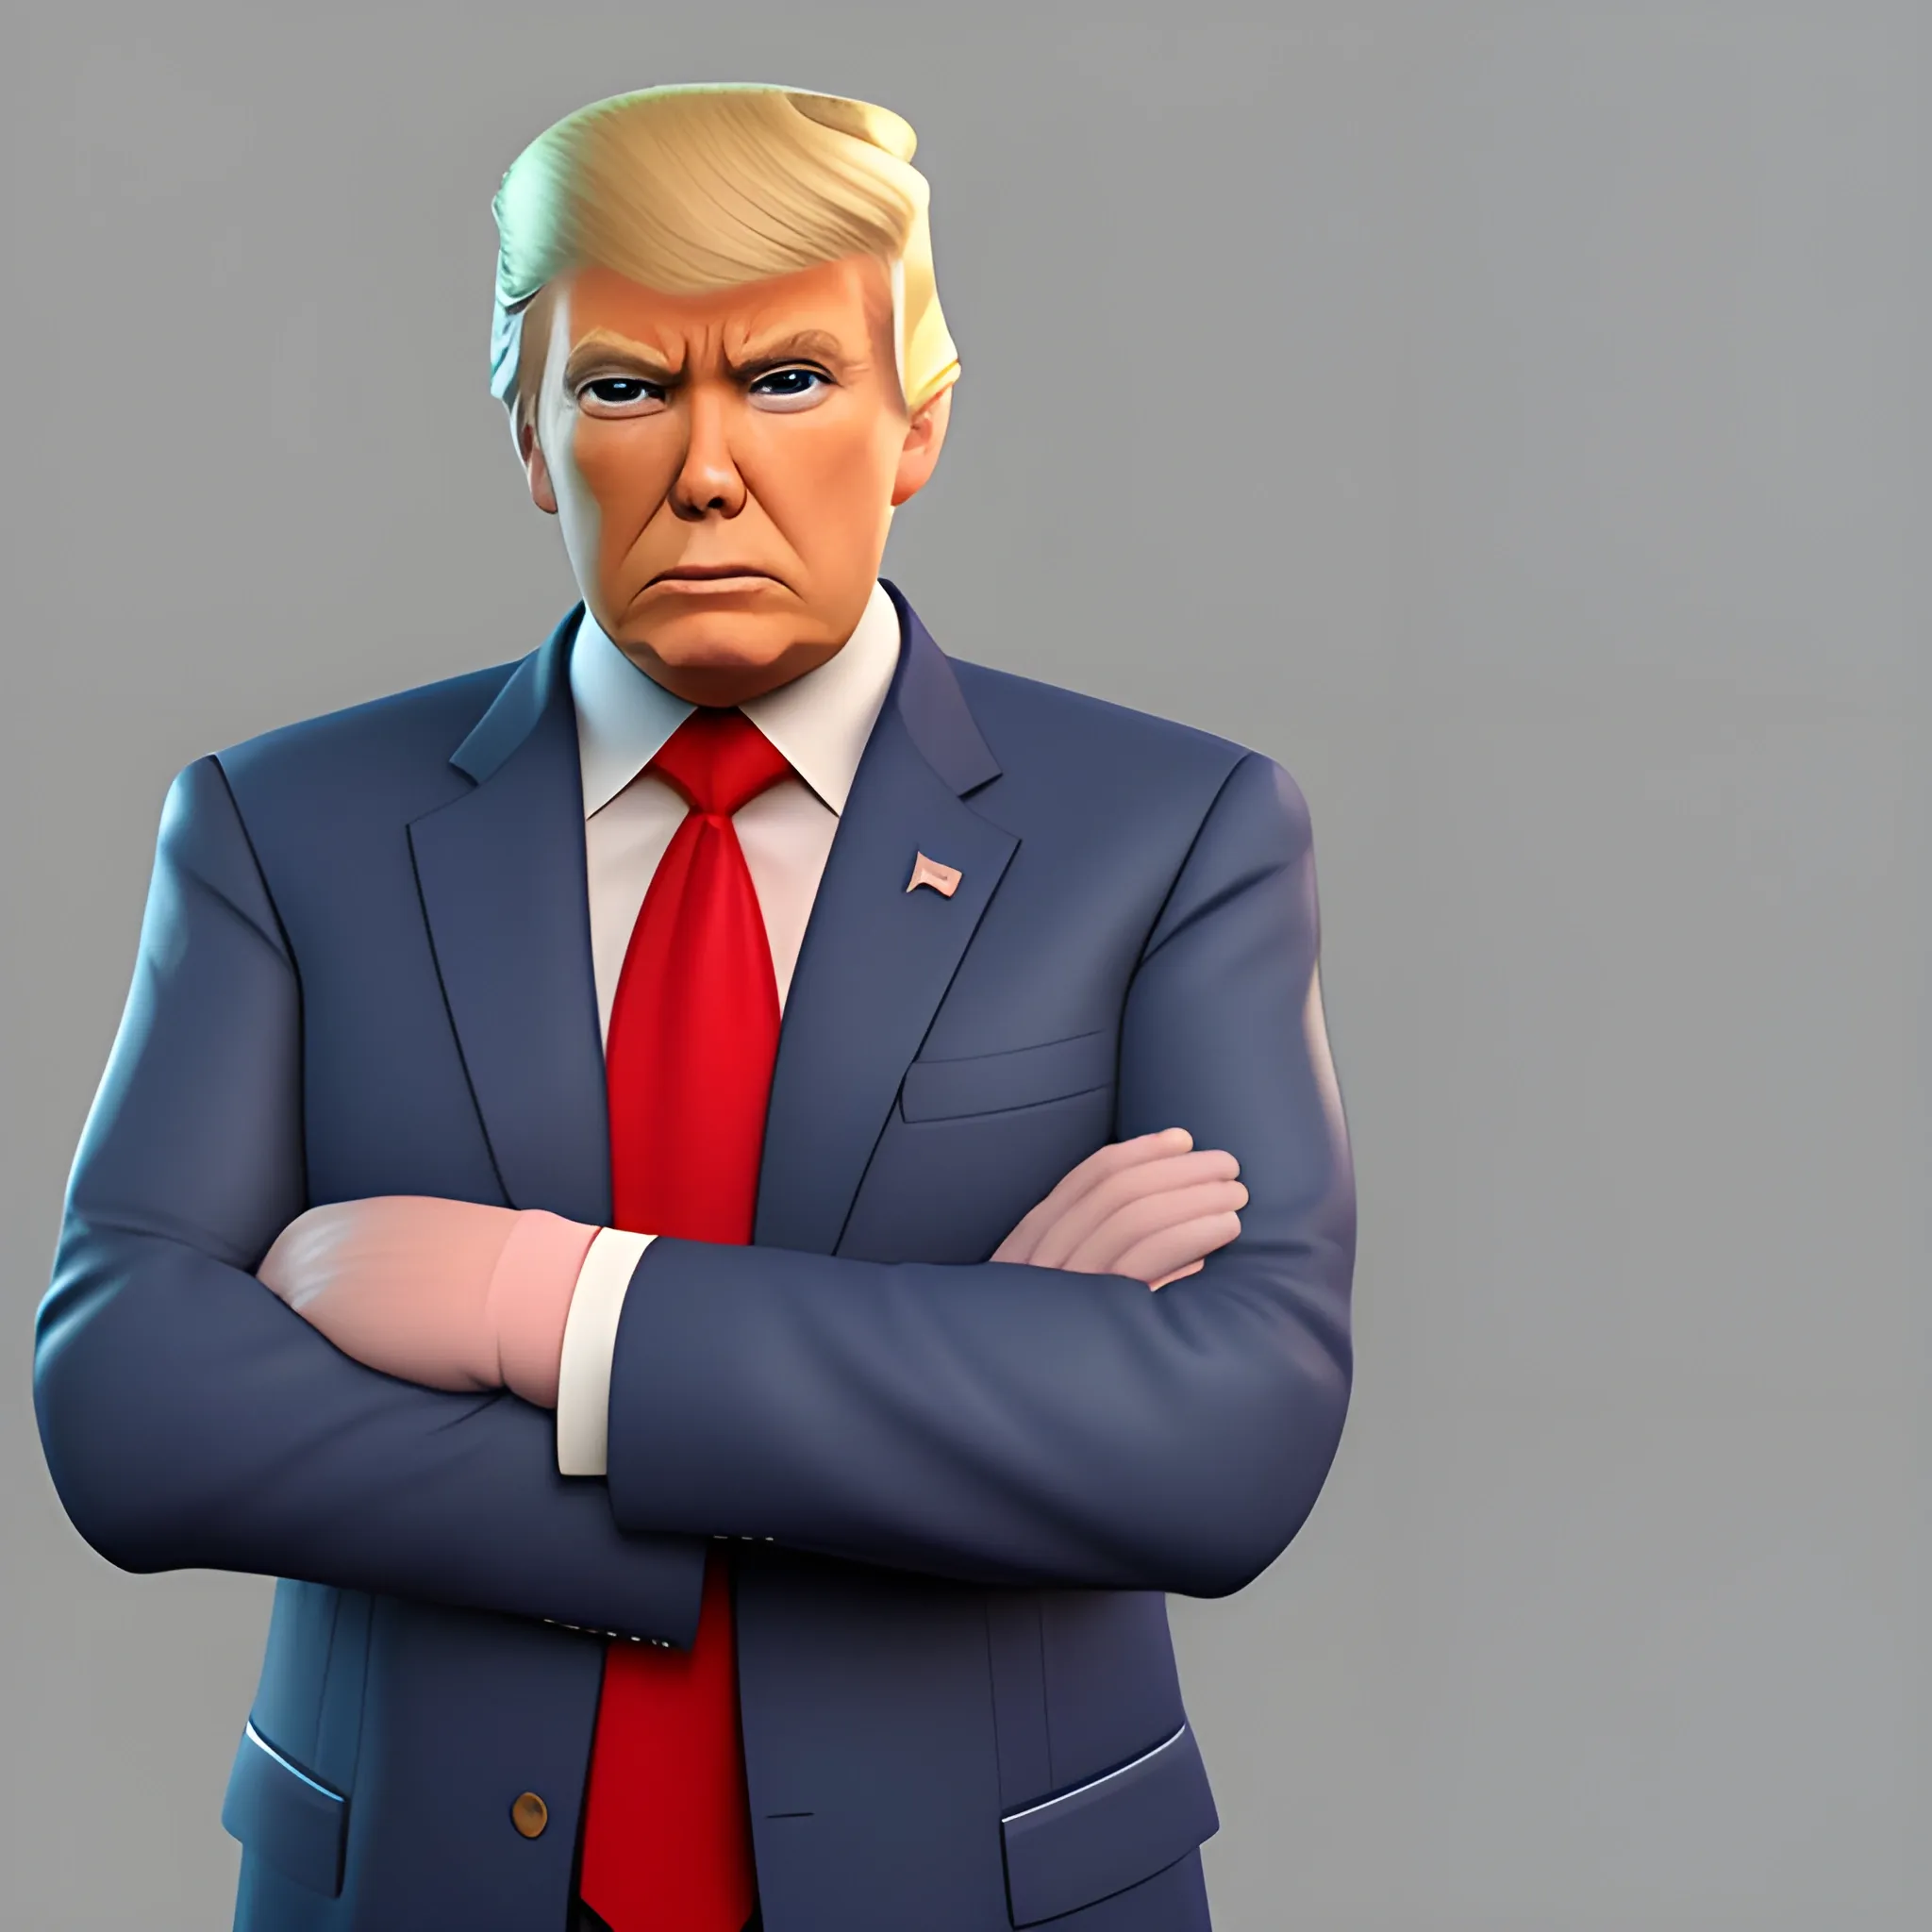 3D render of Donald Trump with his arms crossed looking straight into the camera. He looks plastic. his face is clear and he is in the artstyle of fortnite. he has a navy blue suit on with a red tie. He looks kind of goofy looking. half body shot. 3D

, 3D, Cartoon